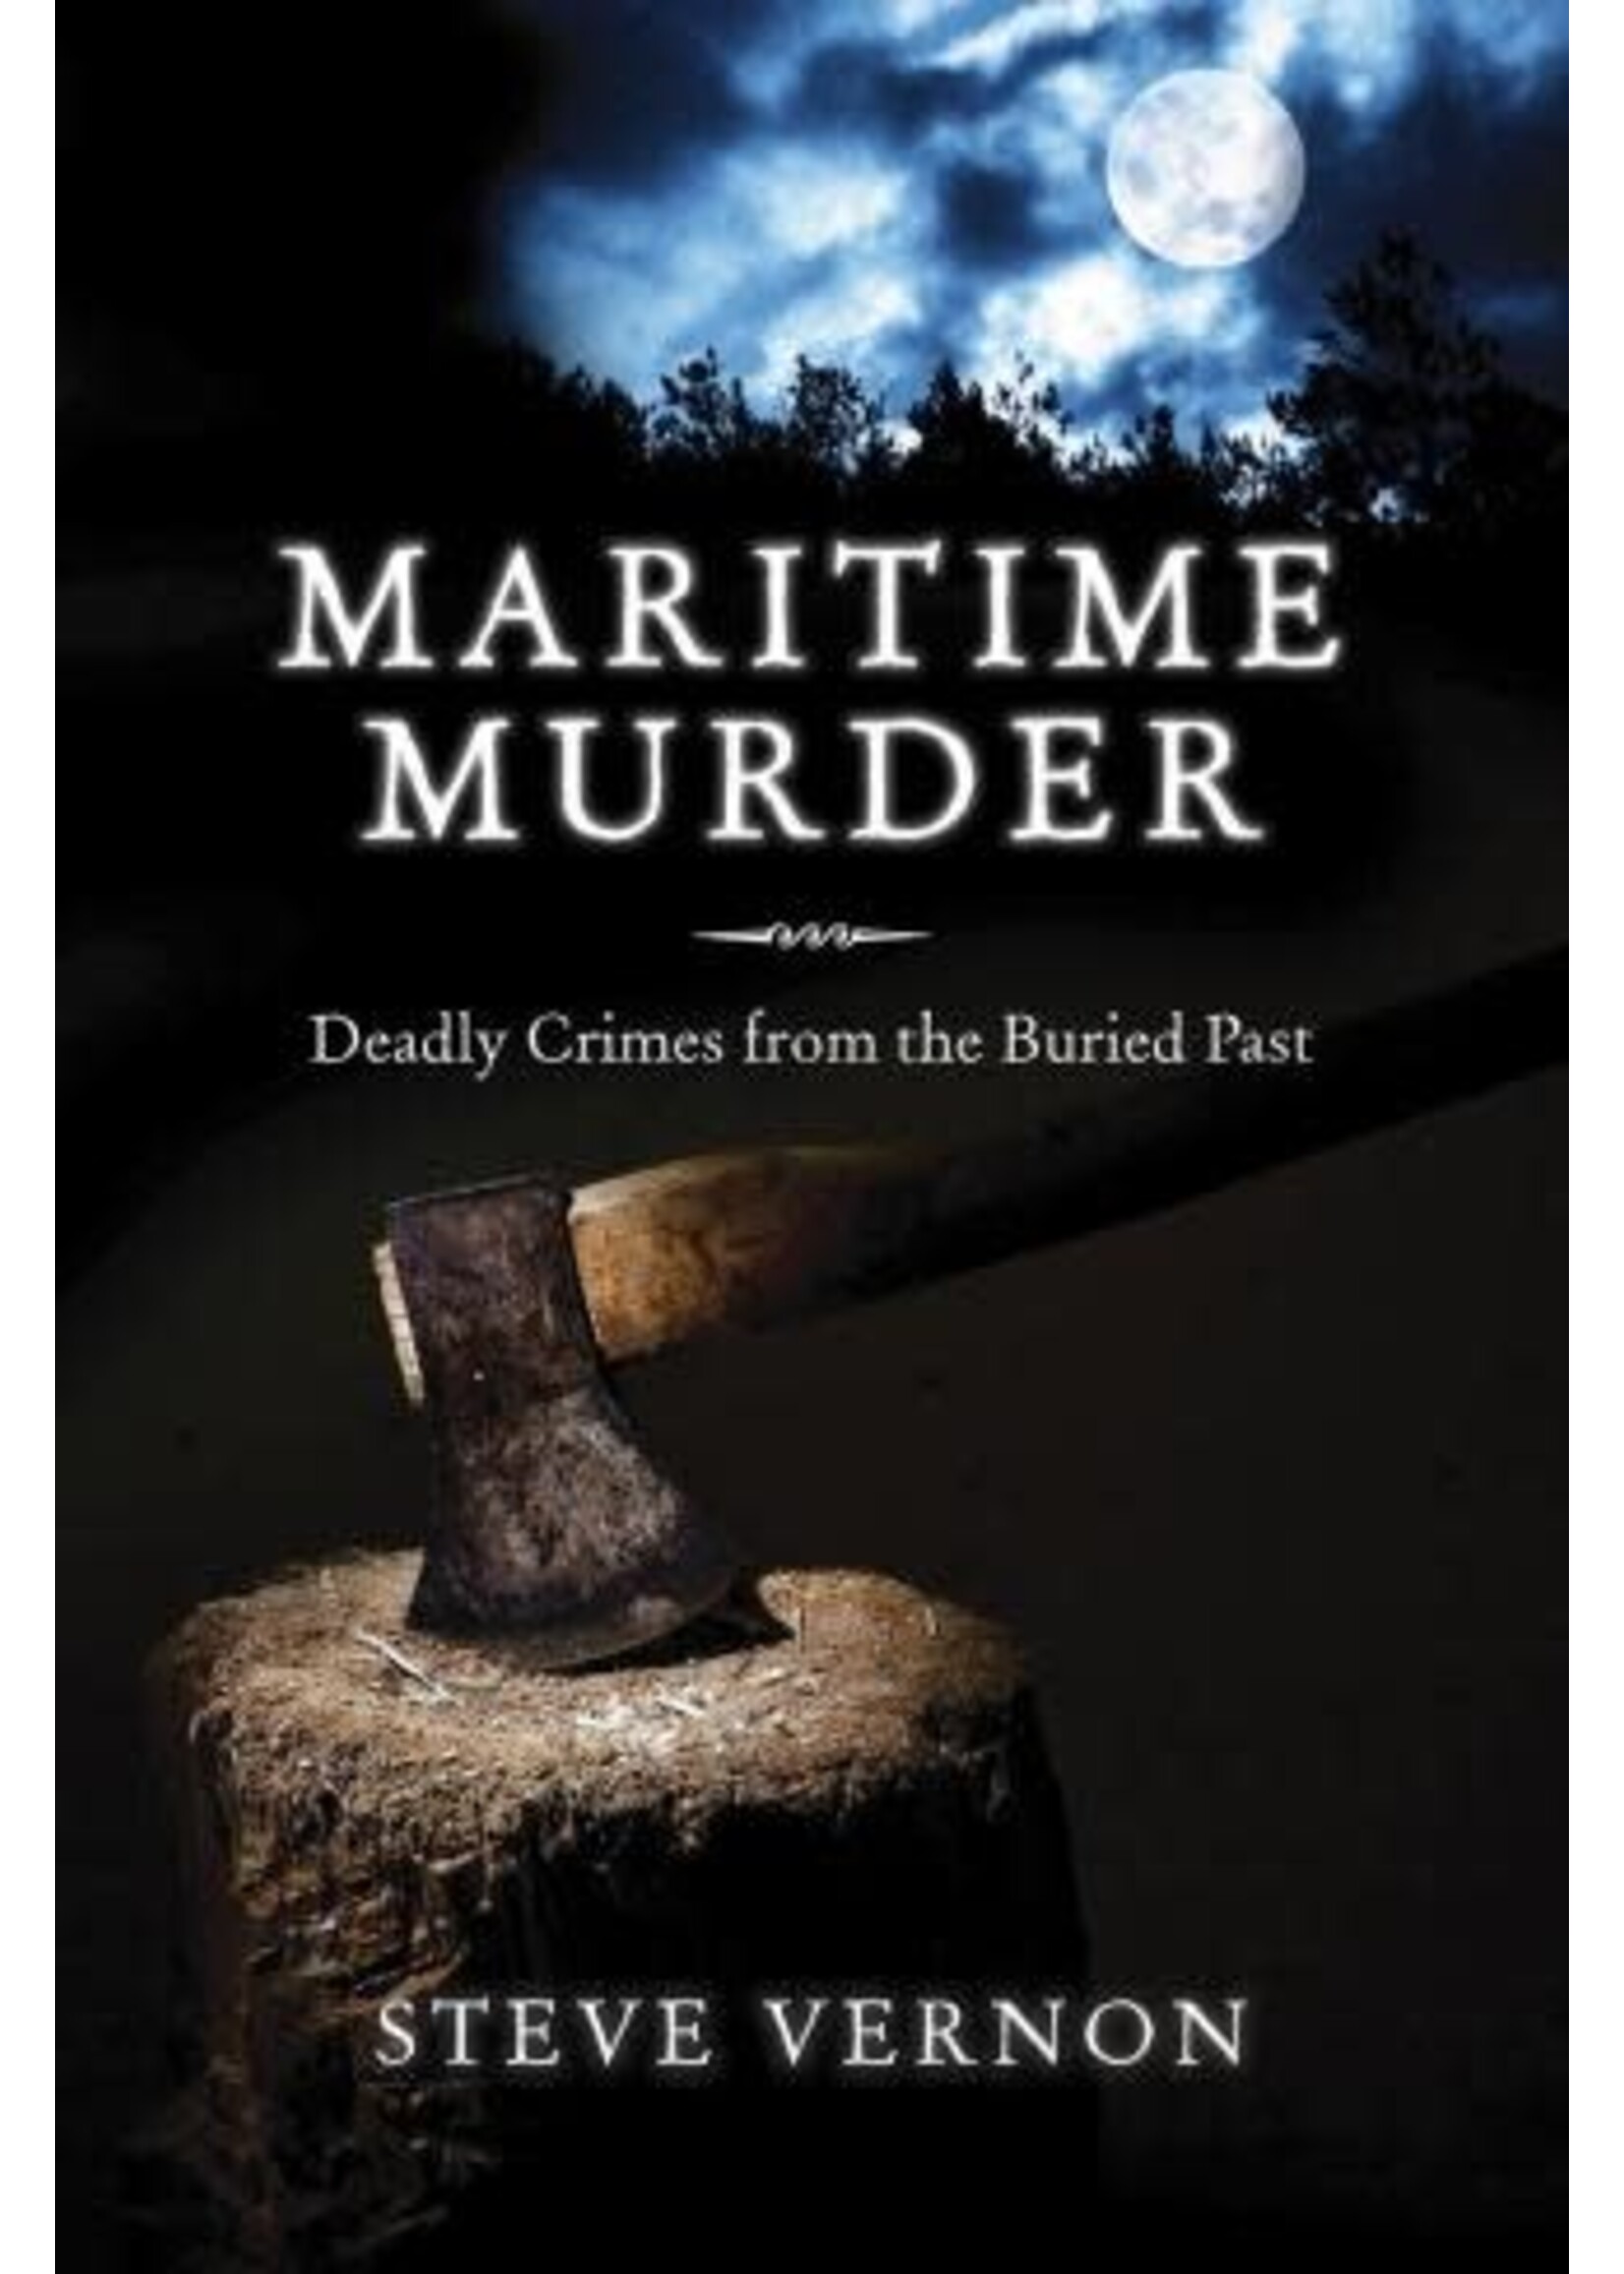 Maritime Murder: Deadly Crimes from the Buried Past by Steve Vernon